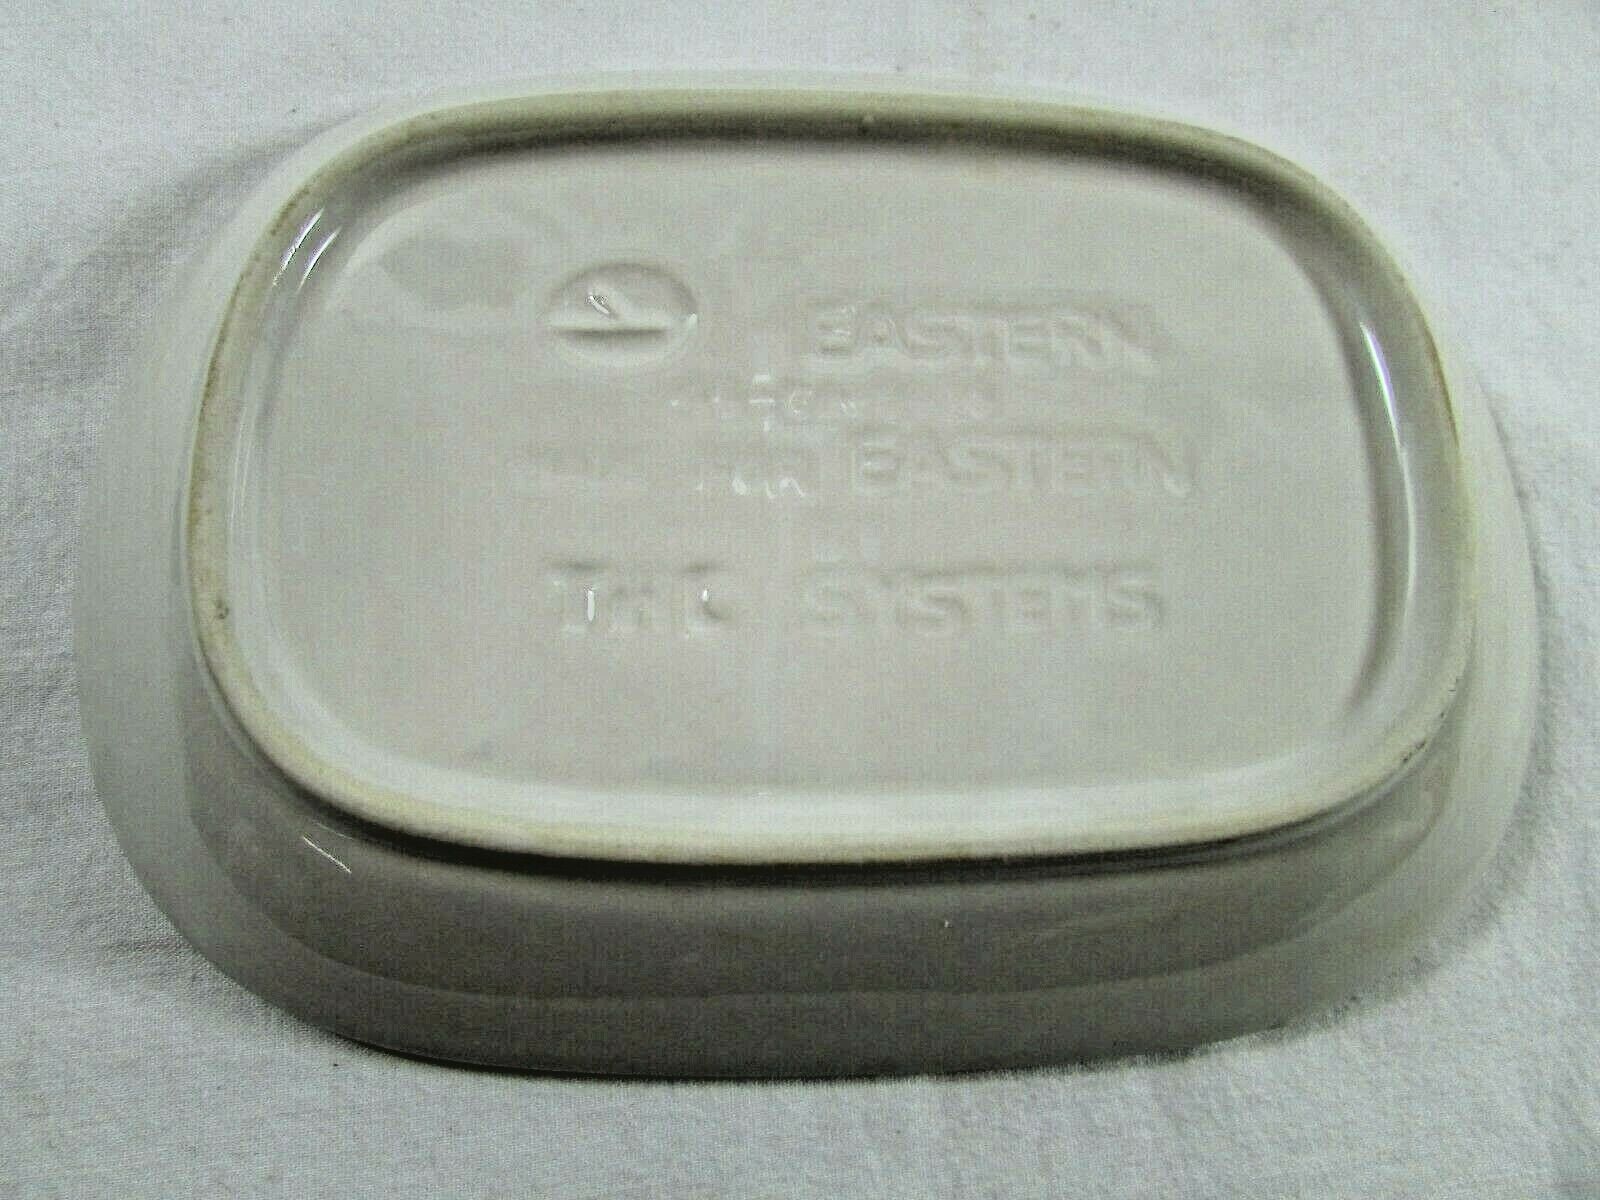 2 Dishes For UNITED AIRLINES & Eastern Airlines By THC Systems PL005 Vintage Без бренда PL 005 - фотография #8